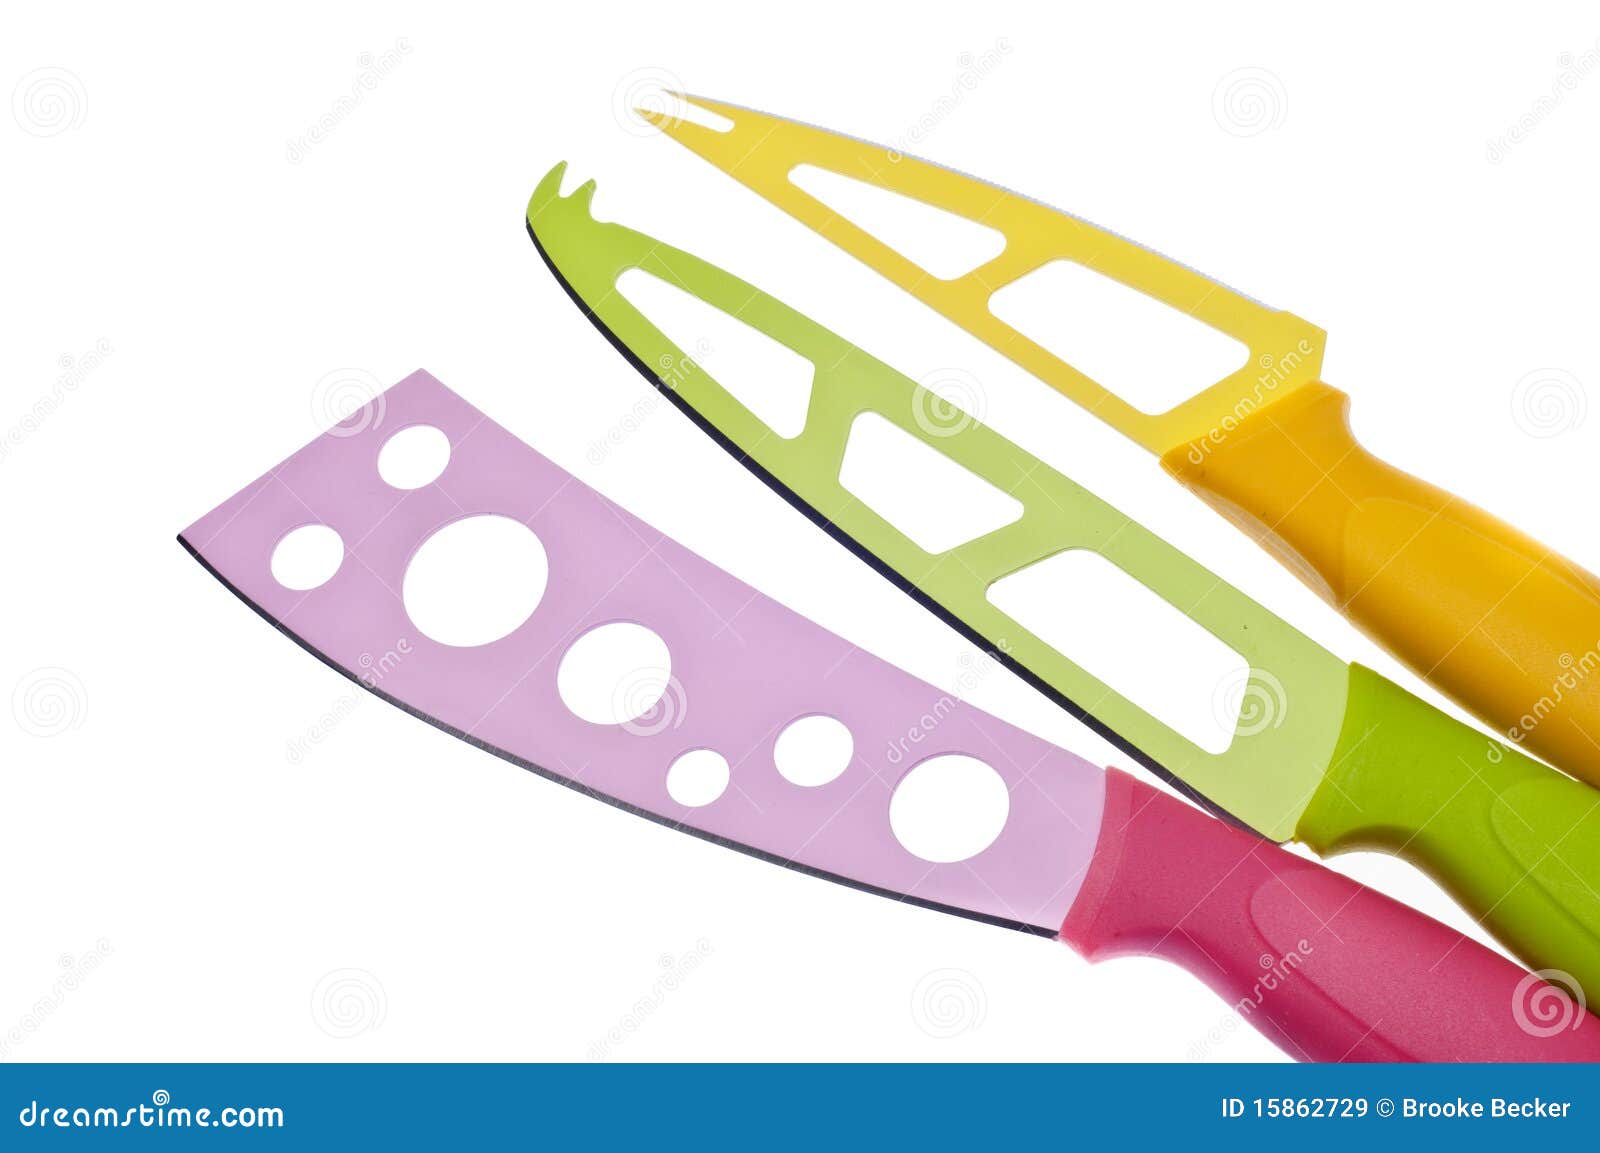  Set  Of Modern  Kitchen  Knives  Royalty Free Stock Images 